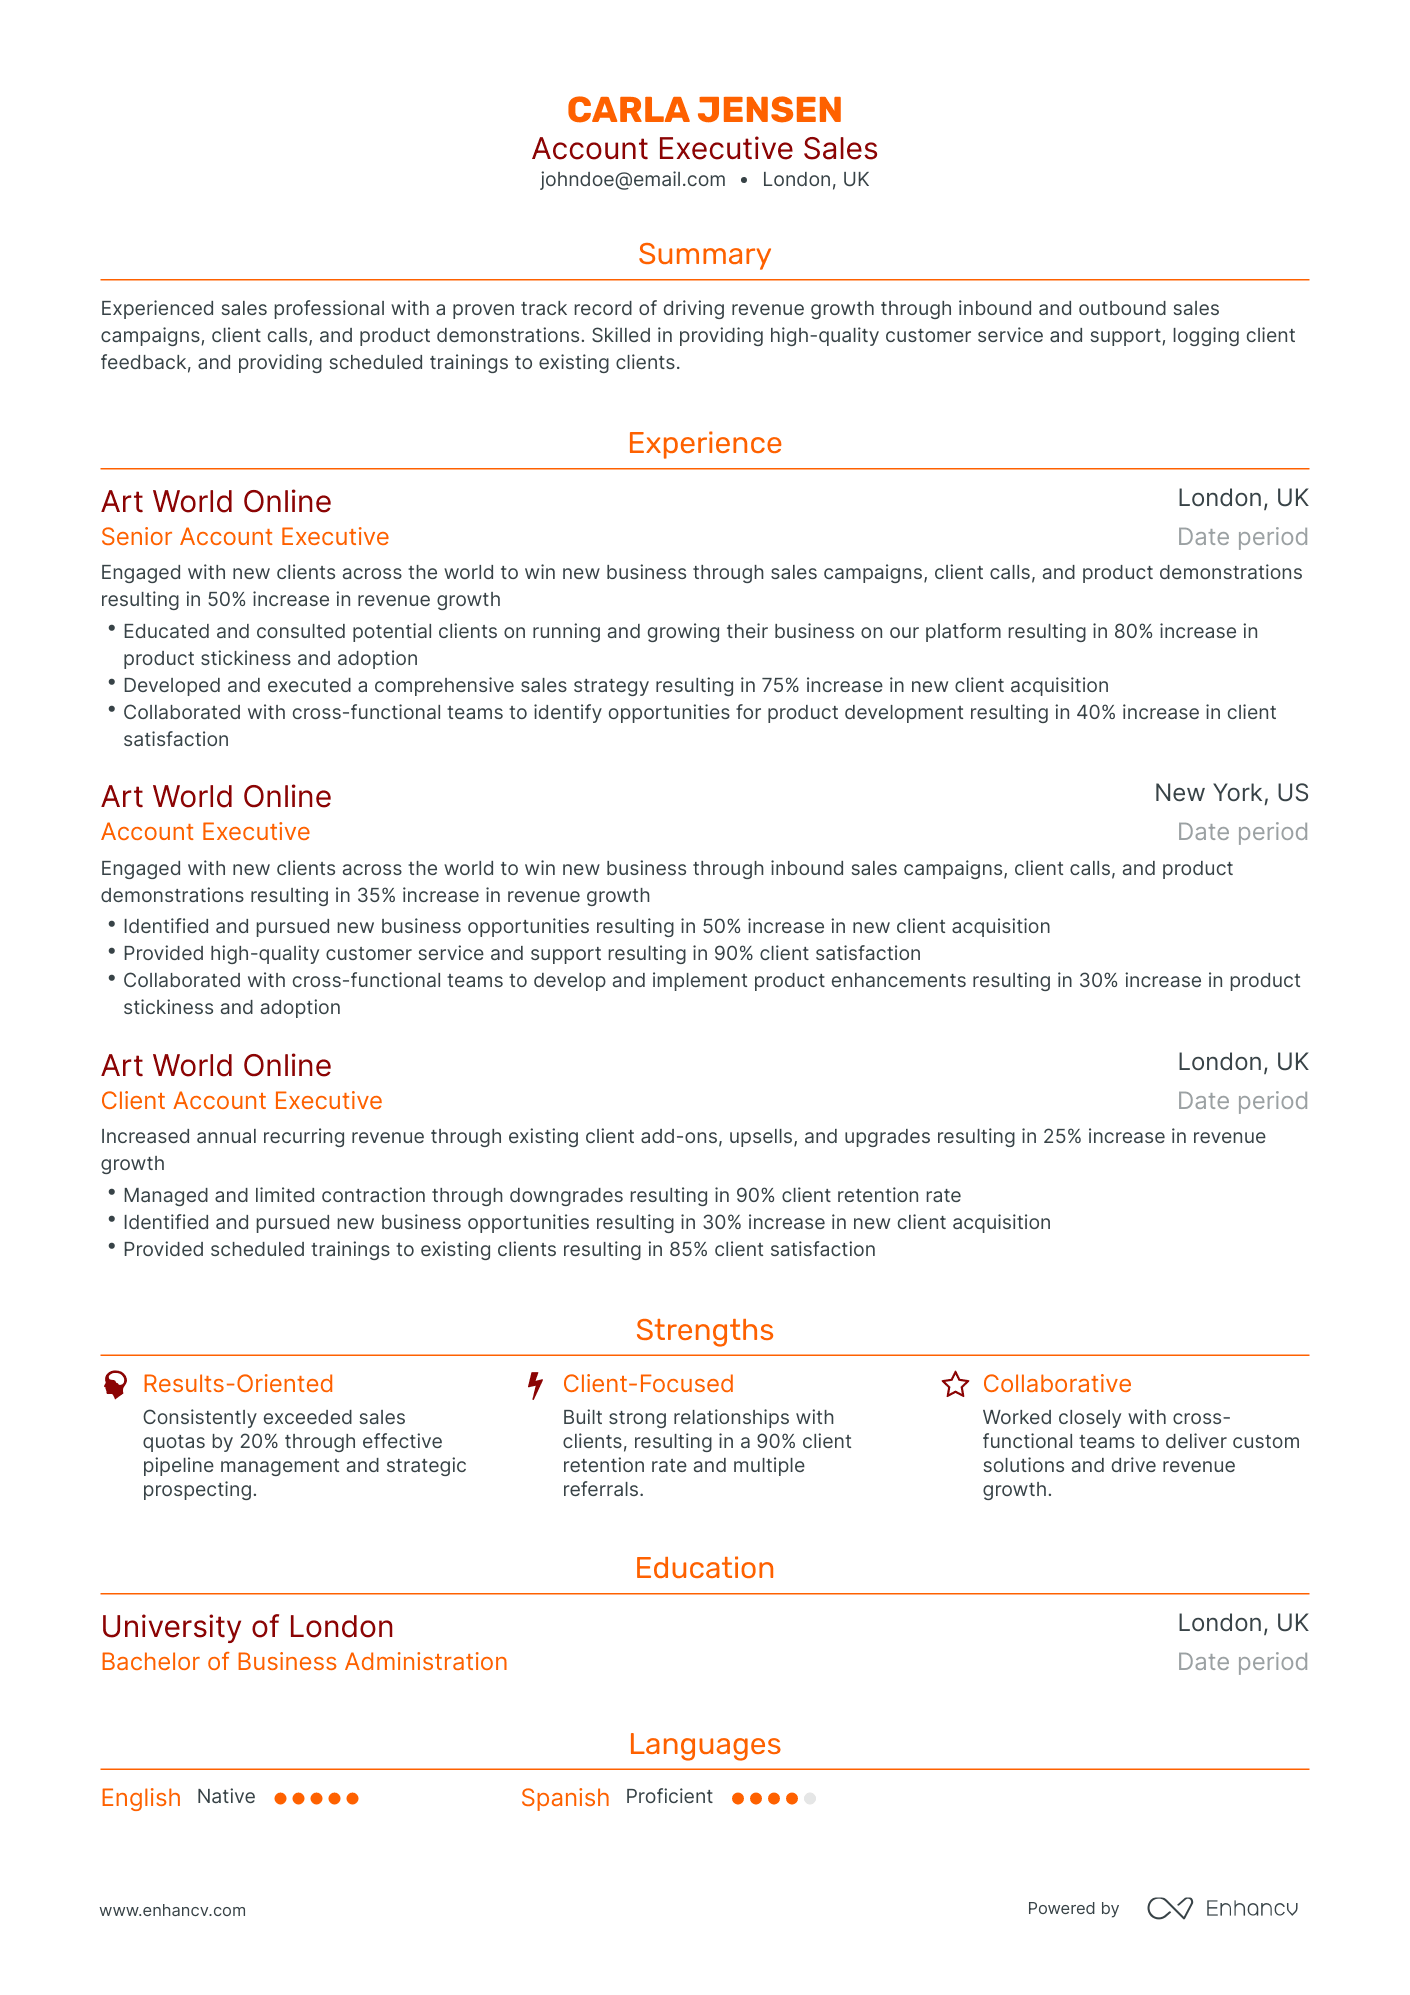 Traditional Account Executive Sales Resume Template